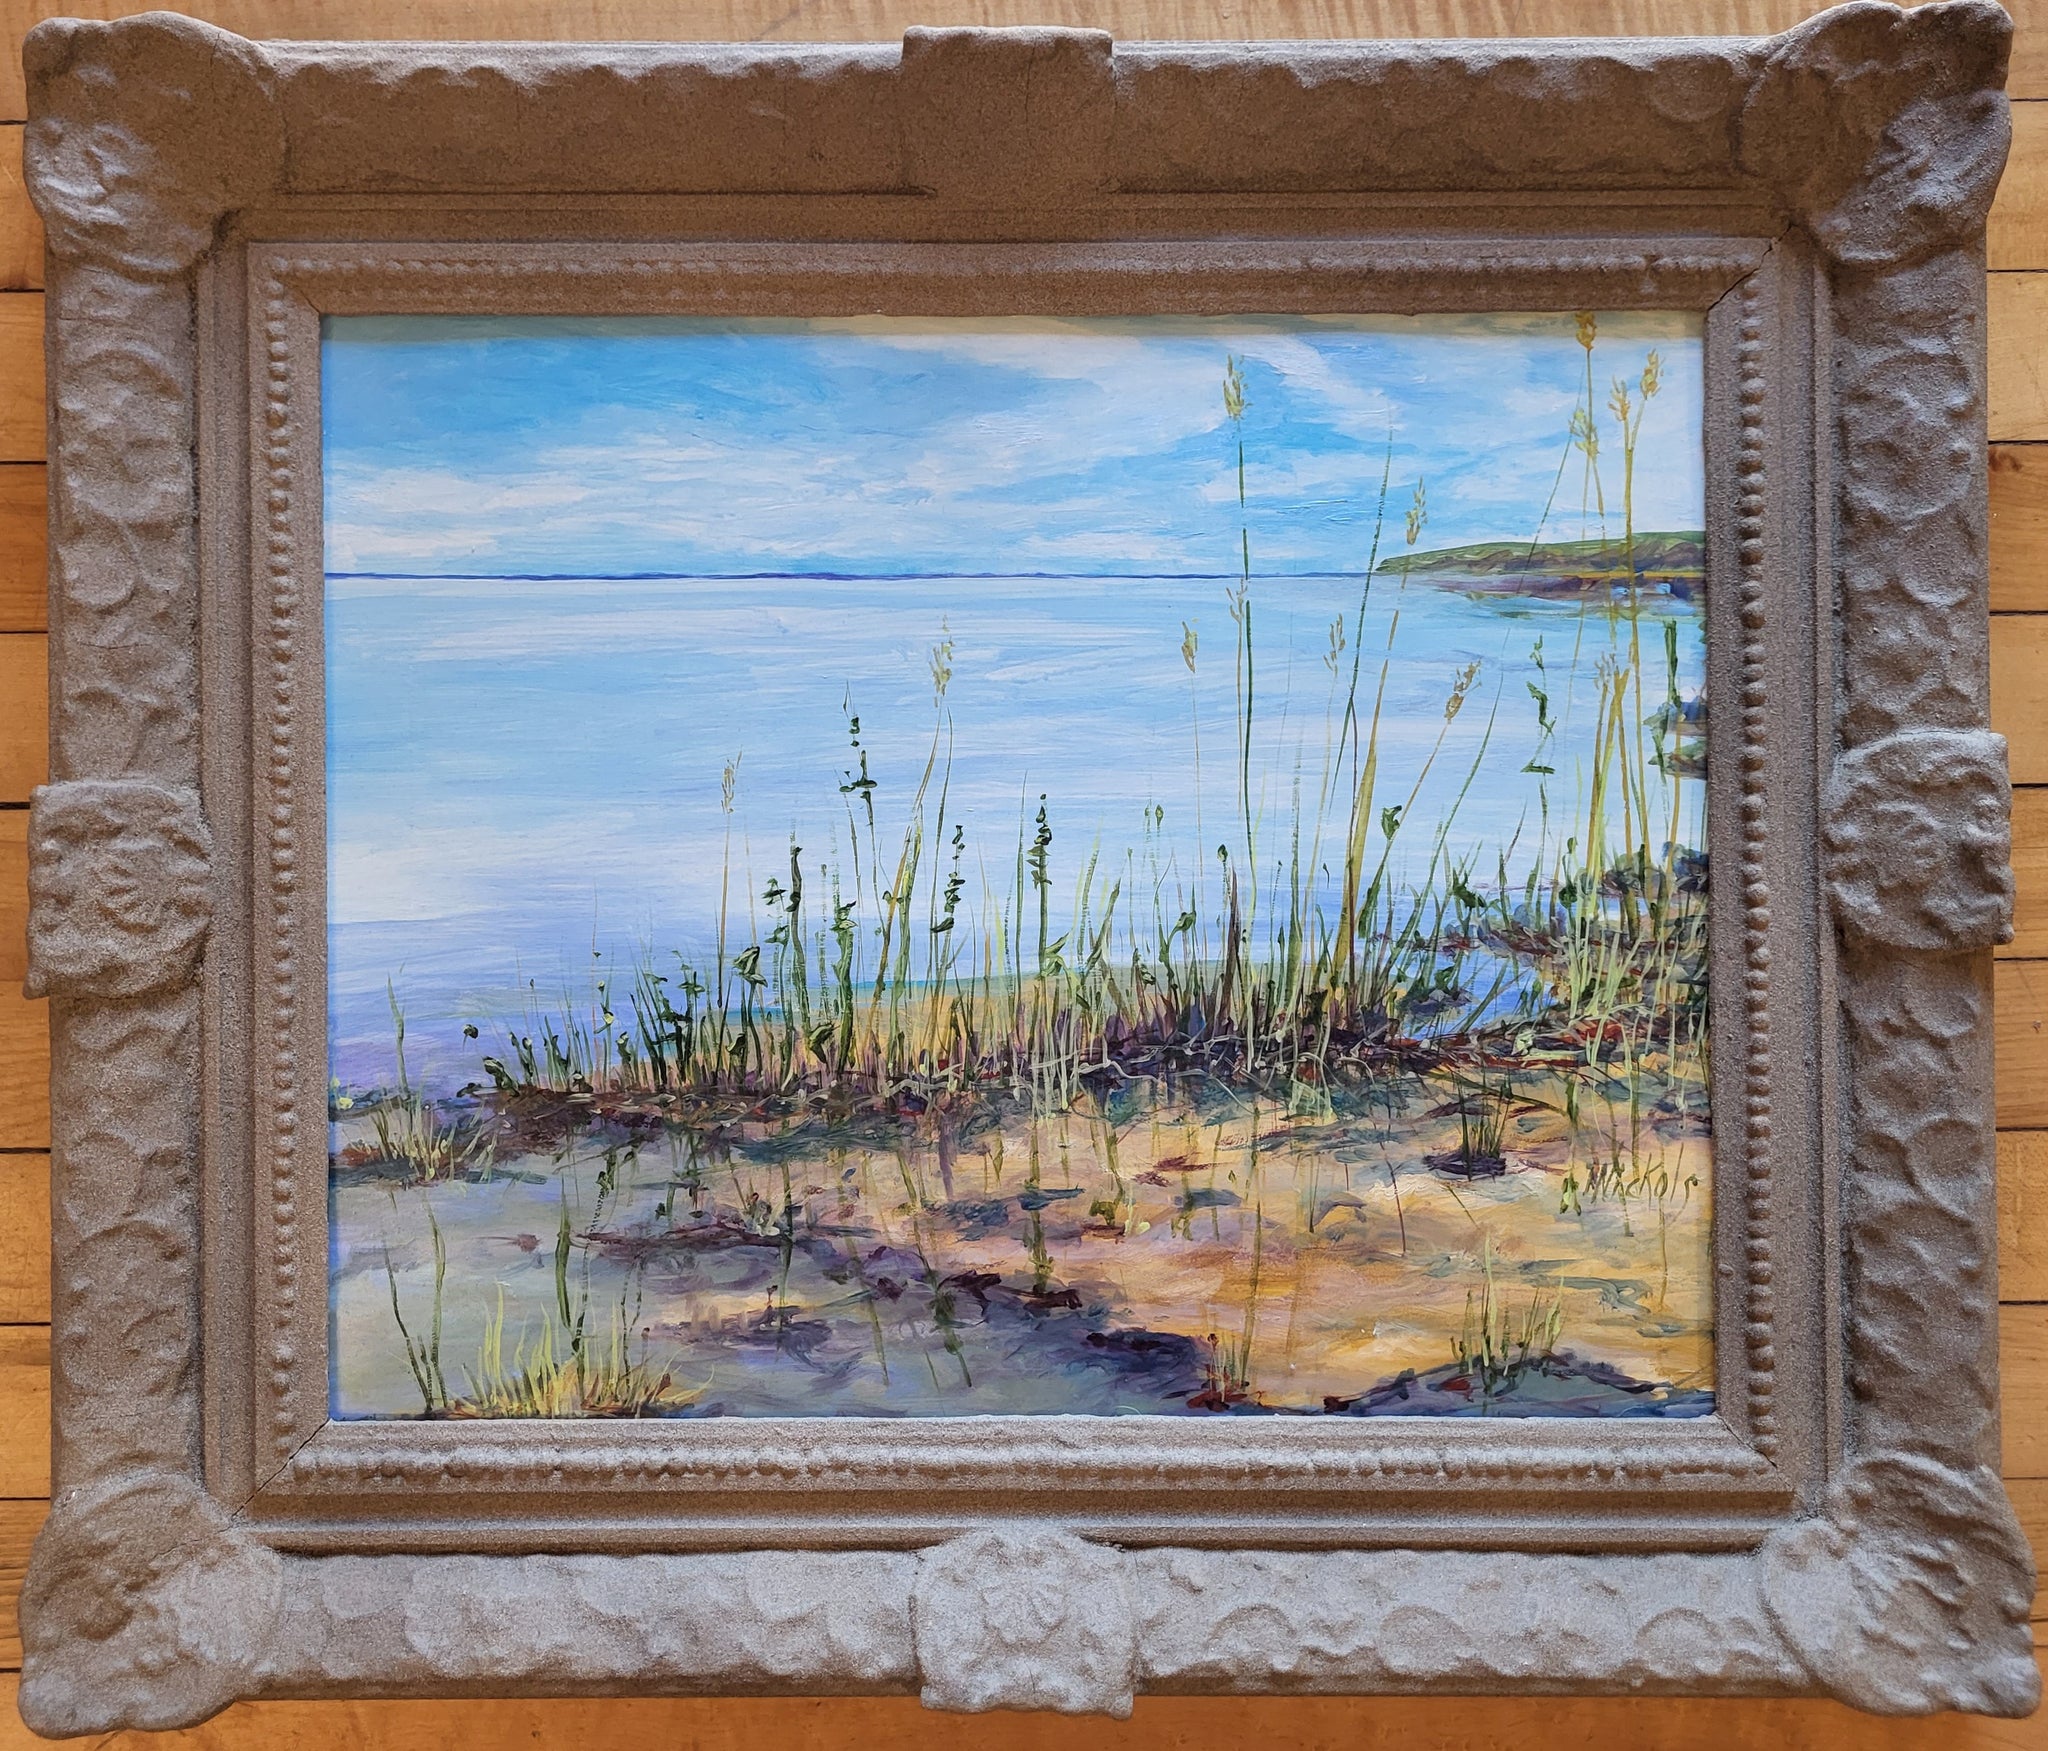 “Calming” - 22x25 Framed Original Oil Painting by Marcia Nickols